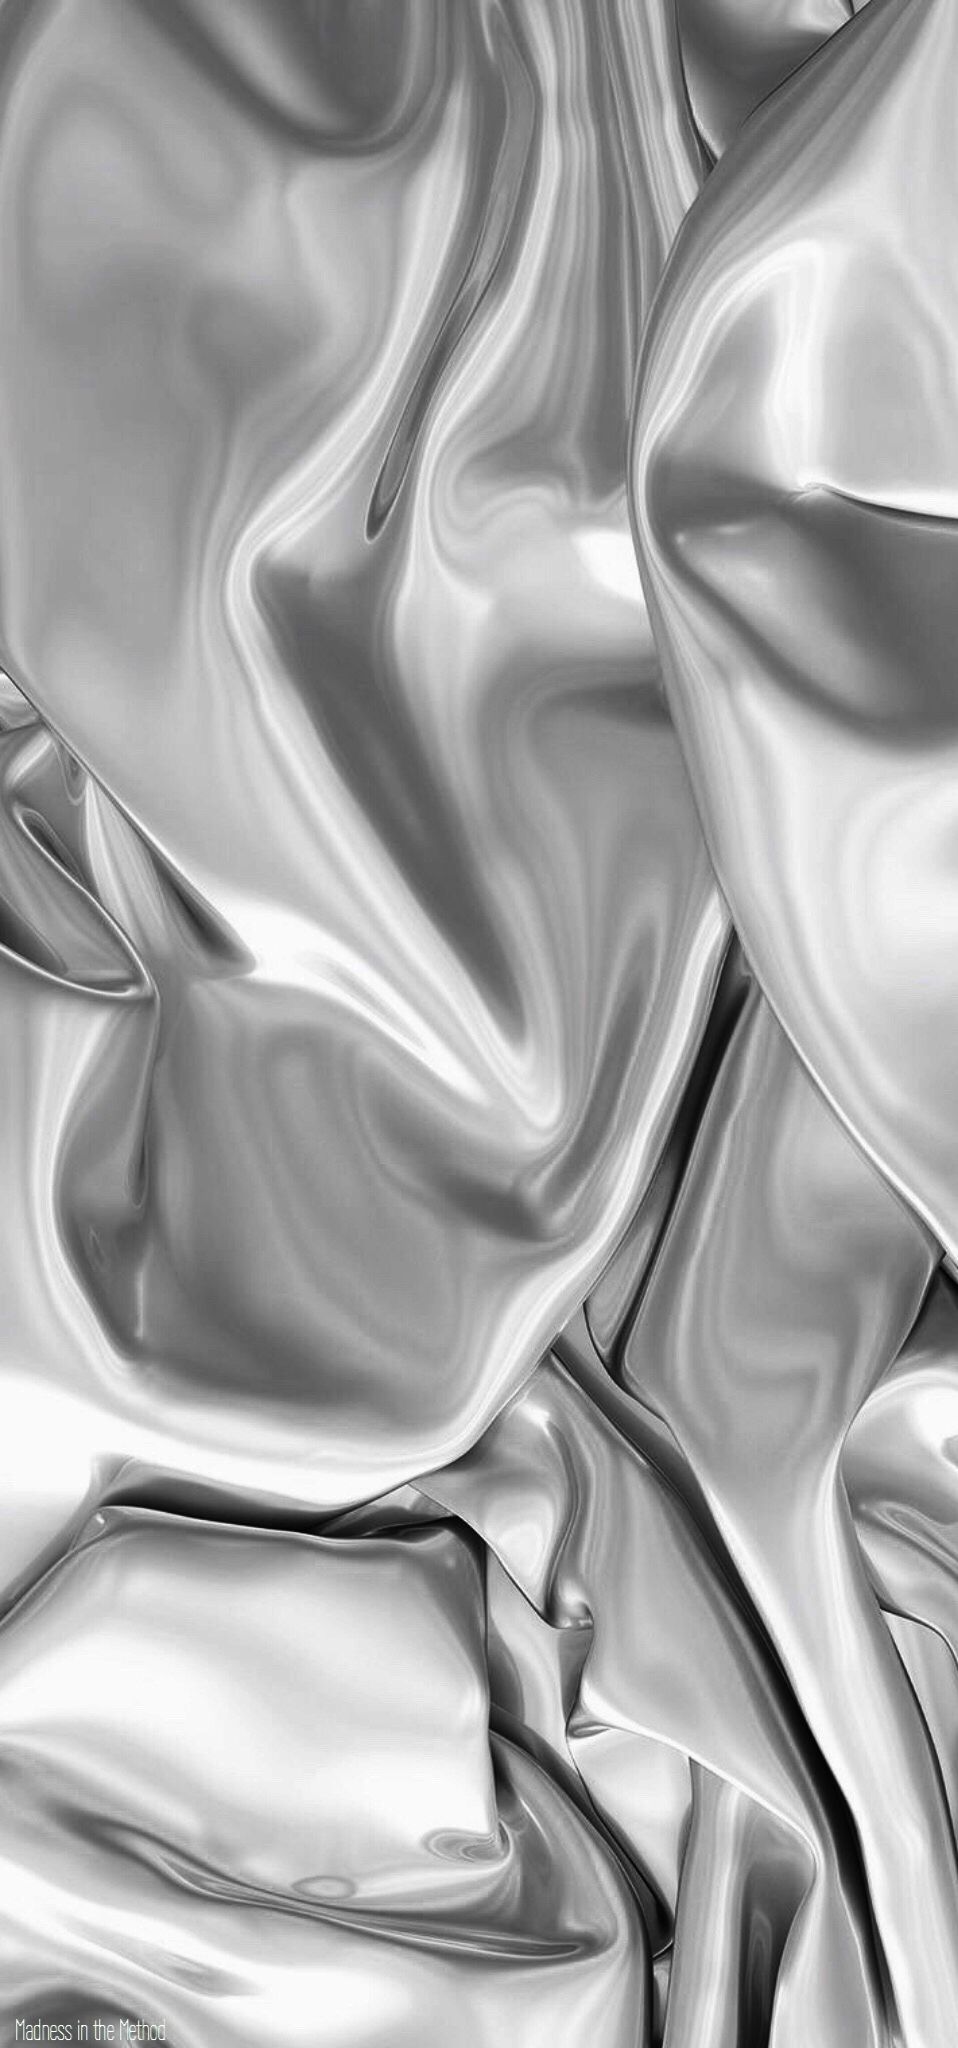 silver. White and silver wallpaper, Abstract iphone wallpaper, Pretty wallpaper iphone